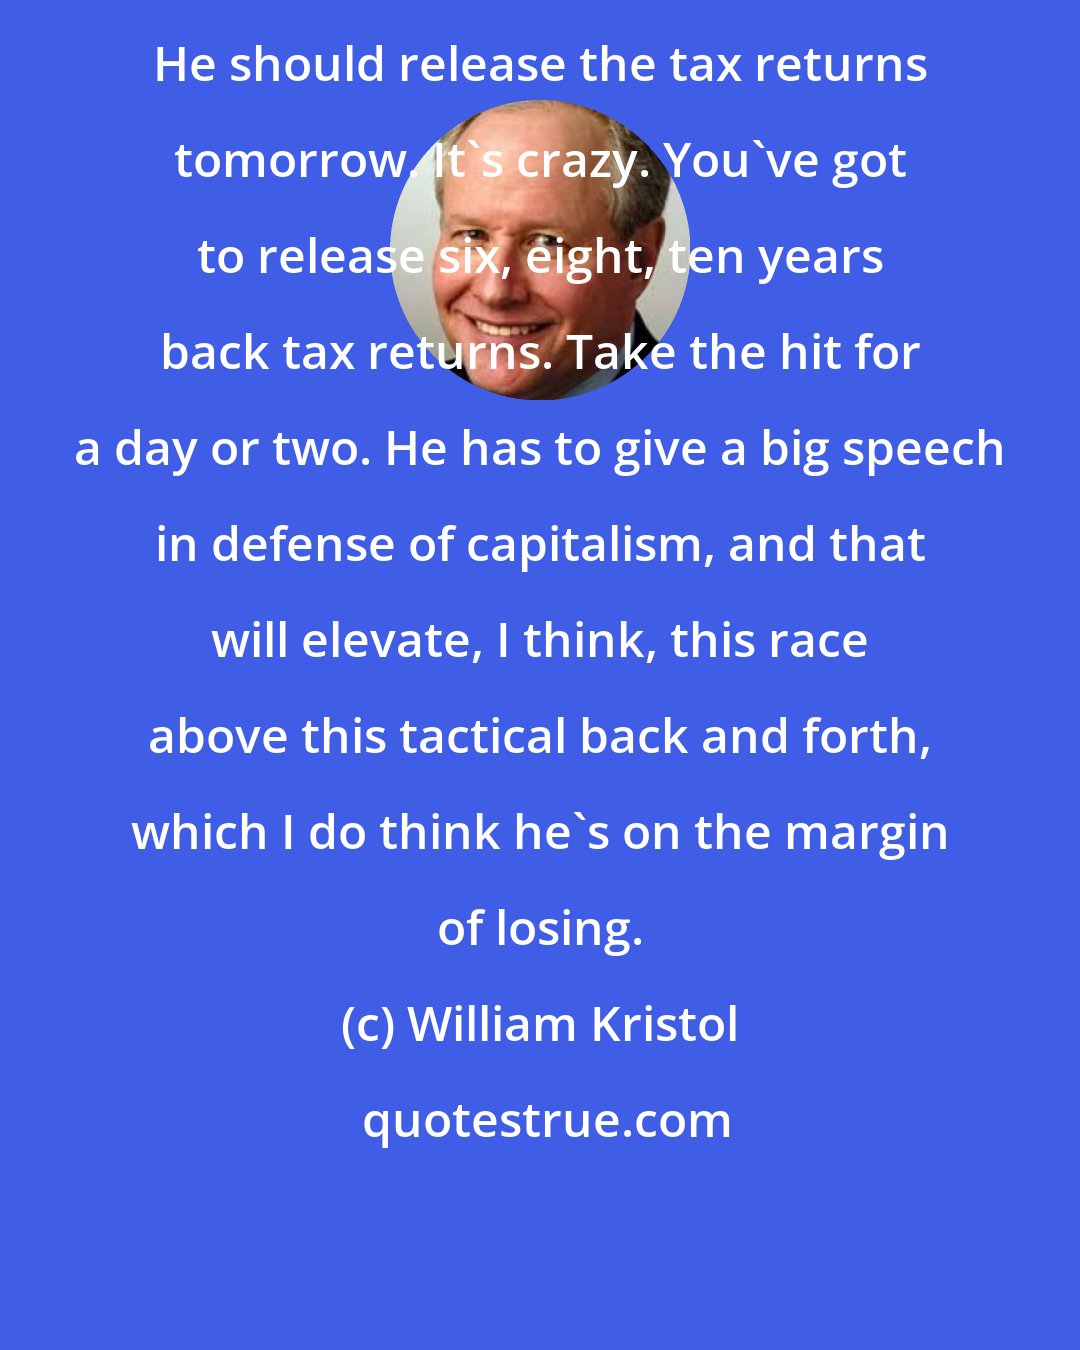 William Kristol: He should release the tax returns tomorrow. It's crazy. You've got to release six, eight, ten years back tax returns. Take the hit for a day or two. He has to give a big speech in defense of capitalism, and that will elevate, I think, this race above this tactical back and forth, which I do think he's on the margin of losing.